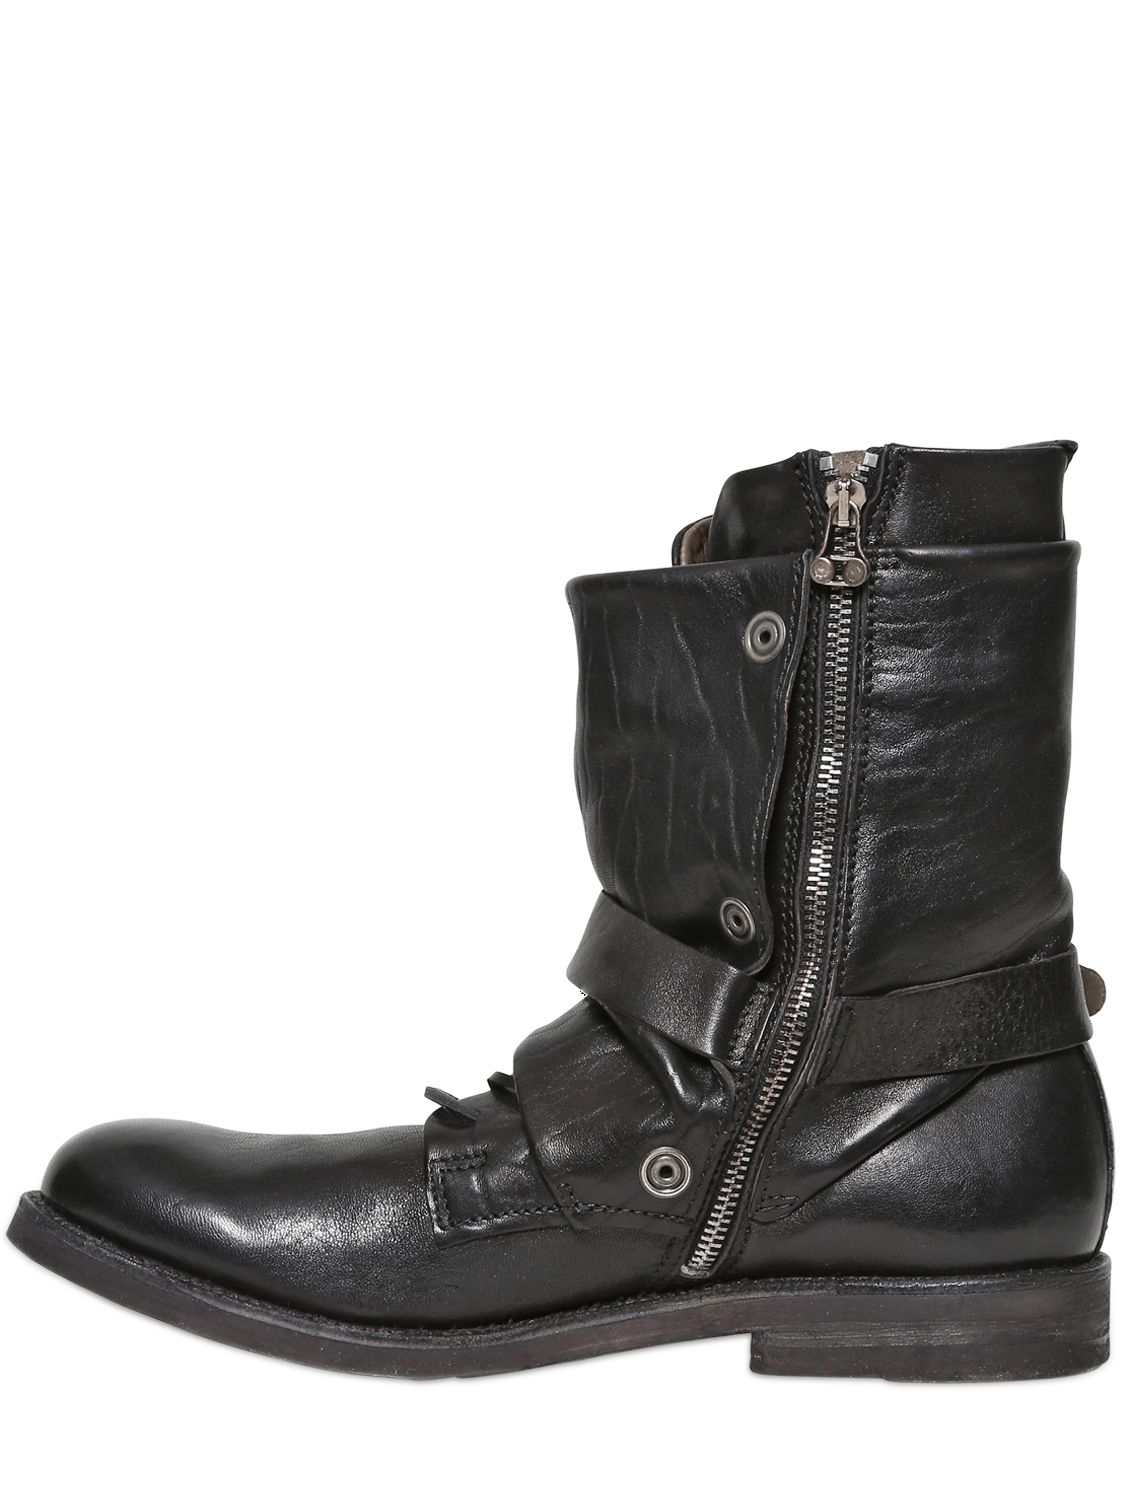 A.s.98 Zip, Buckle & Buttons Leather Boots in Black | Lyst